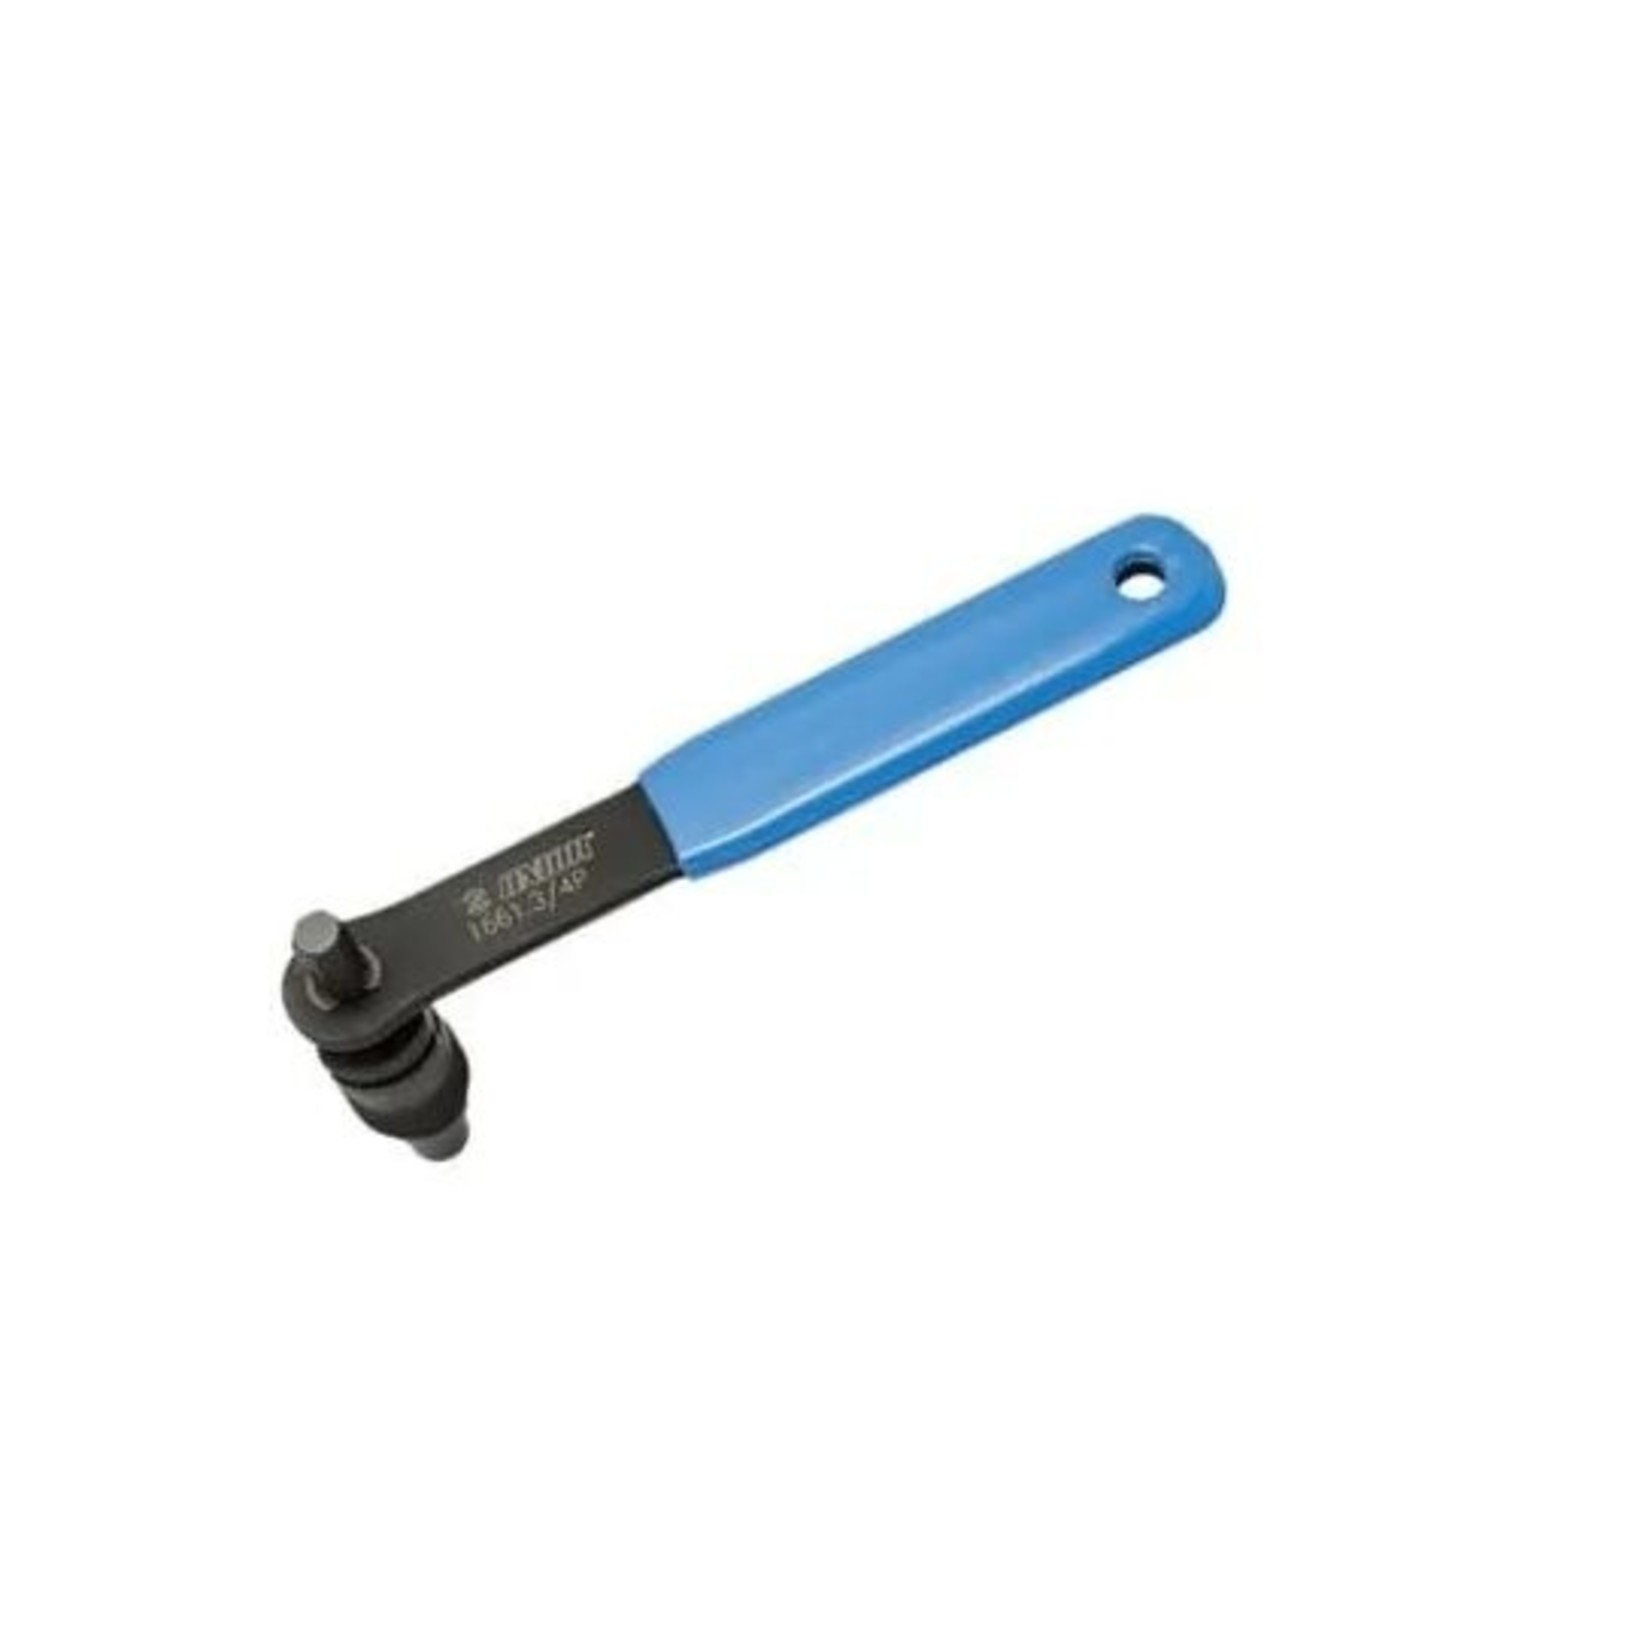 unior Unior Crank Puller Shimano Octalink ISIS And Standard Cranks 623088 Bicycle Tool